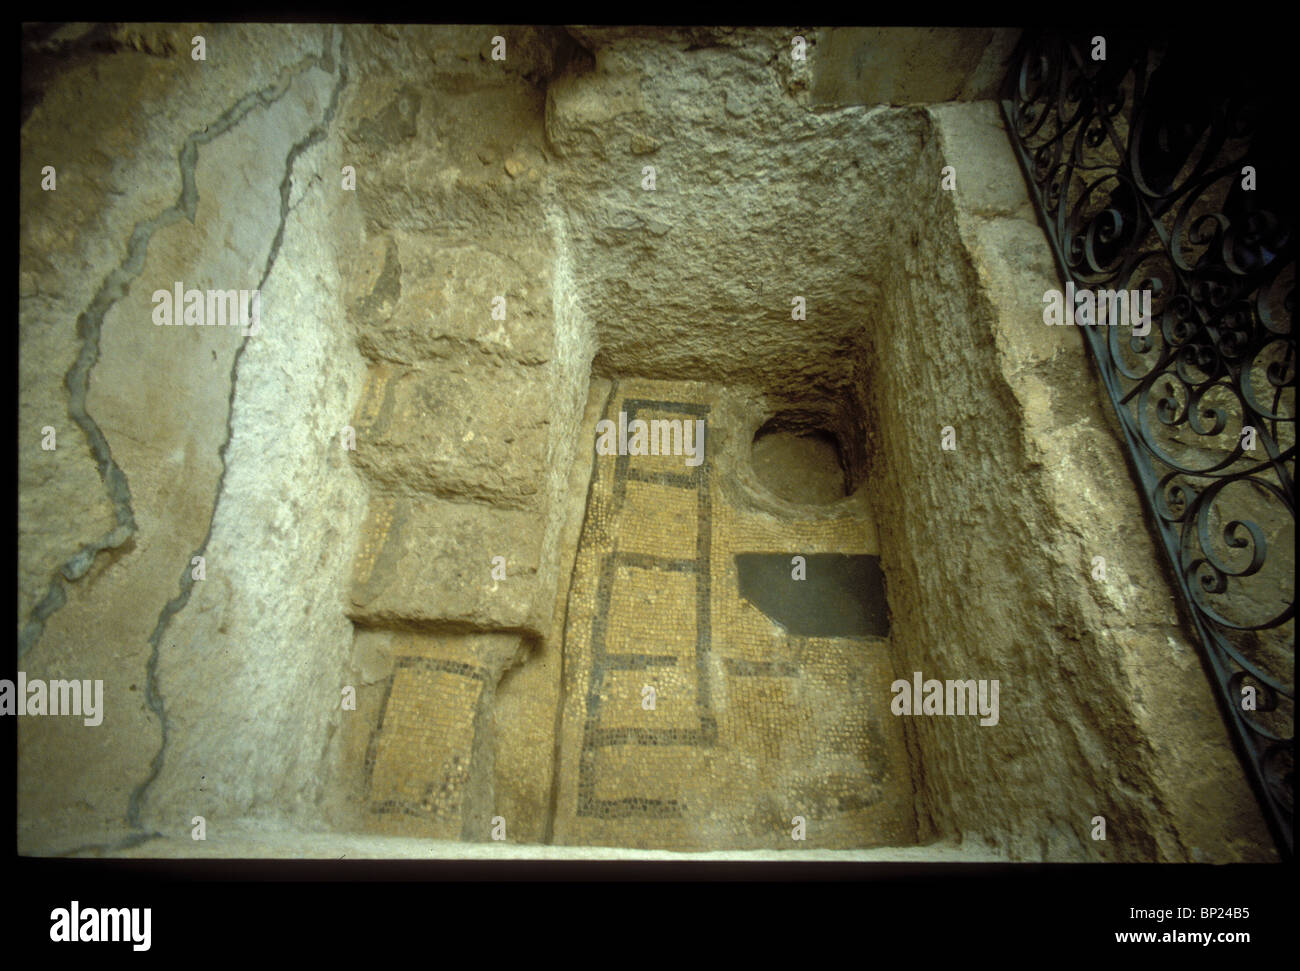 481. NAZARETH, CHURCH OF ST. JOSEPH, BAPTISMAL BASIN IN THE CRYPT DATING FROM PRE-BYZANTINE PERIOD Stock Photo